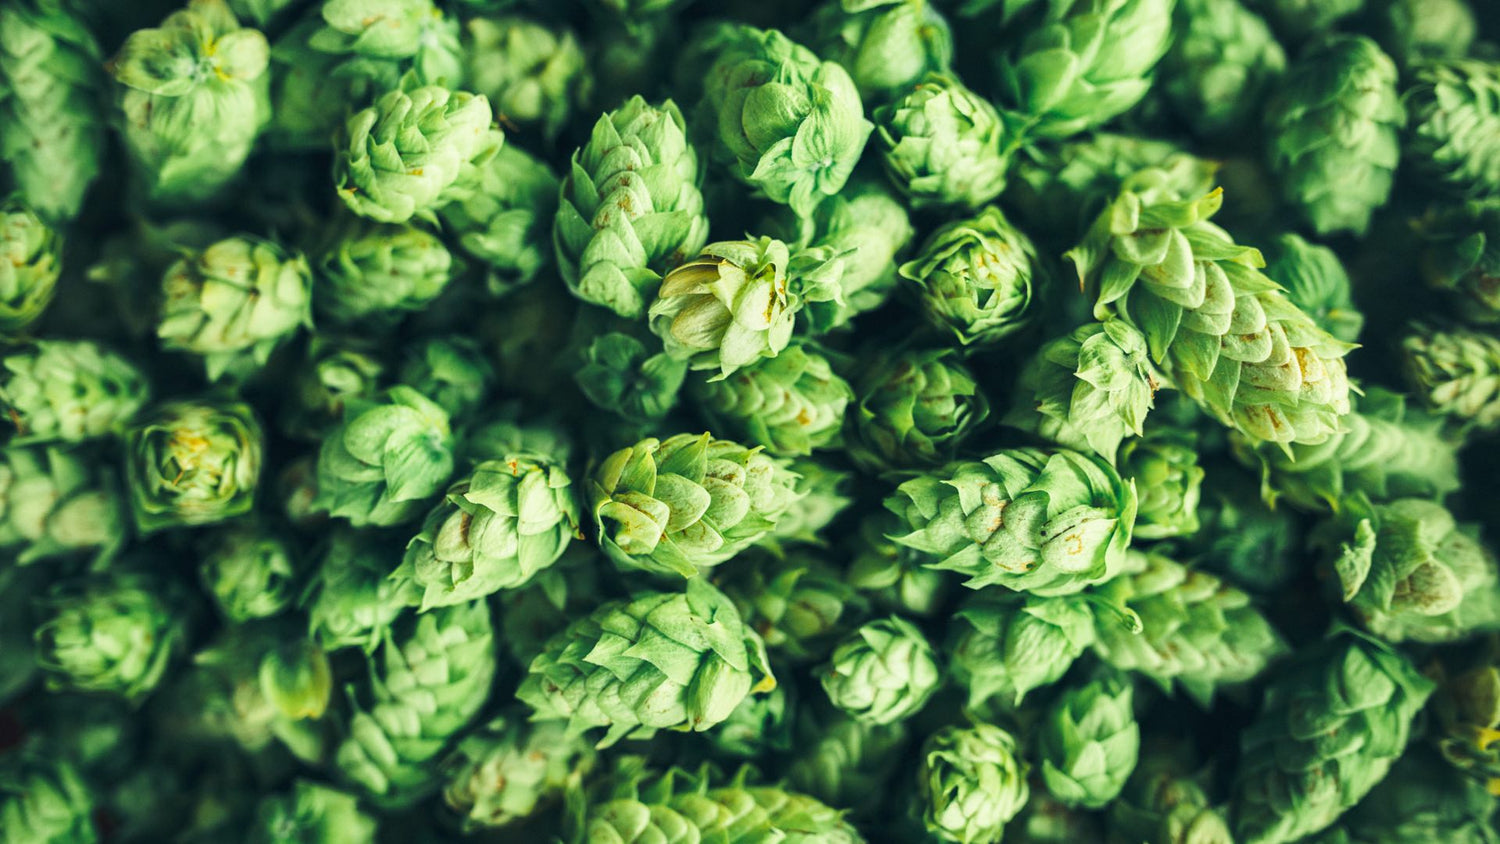 A pile of English Hops used as background